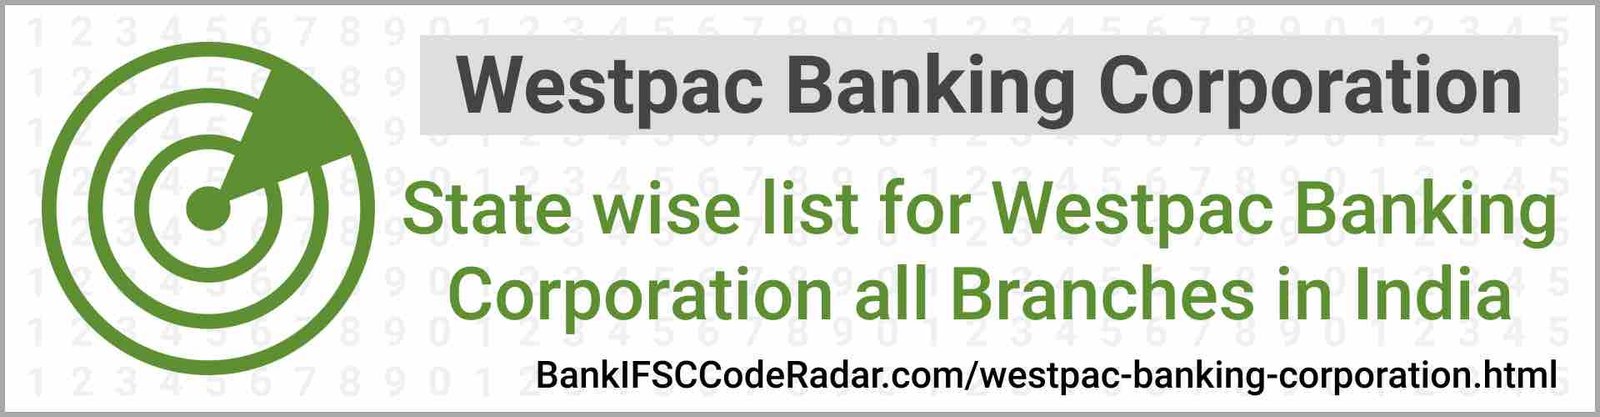 Westpac Banking Corporation All Branches India